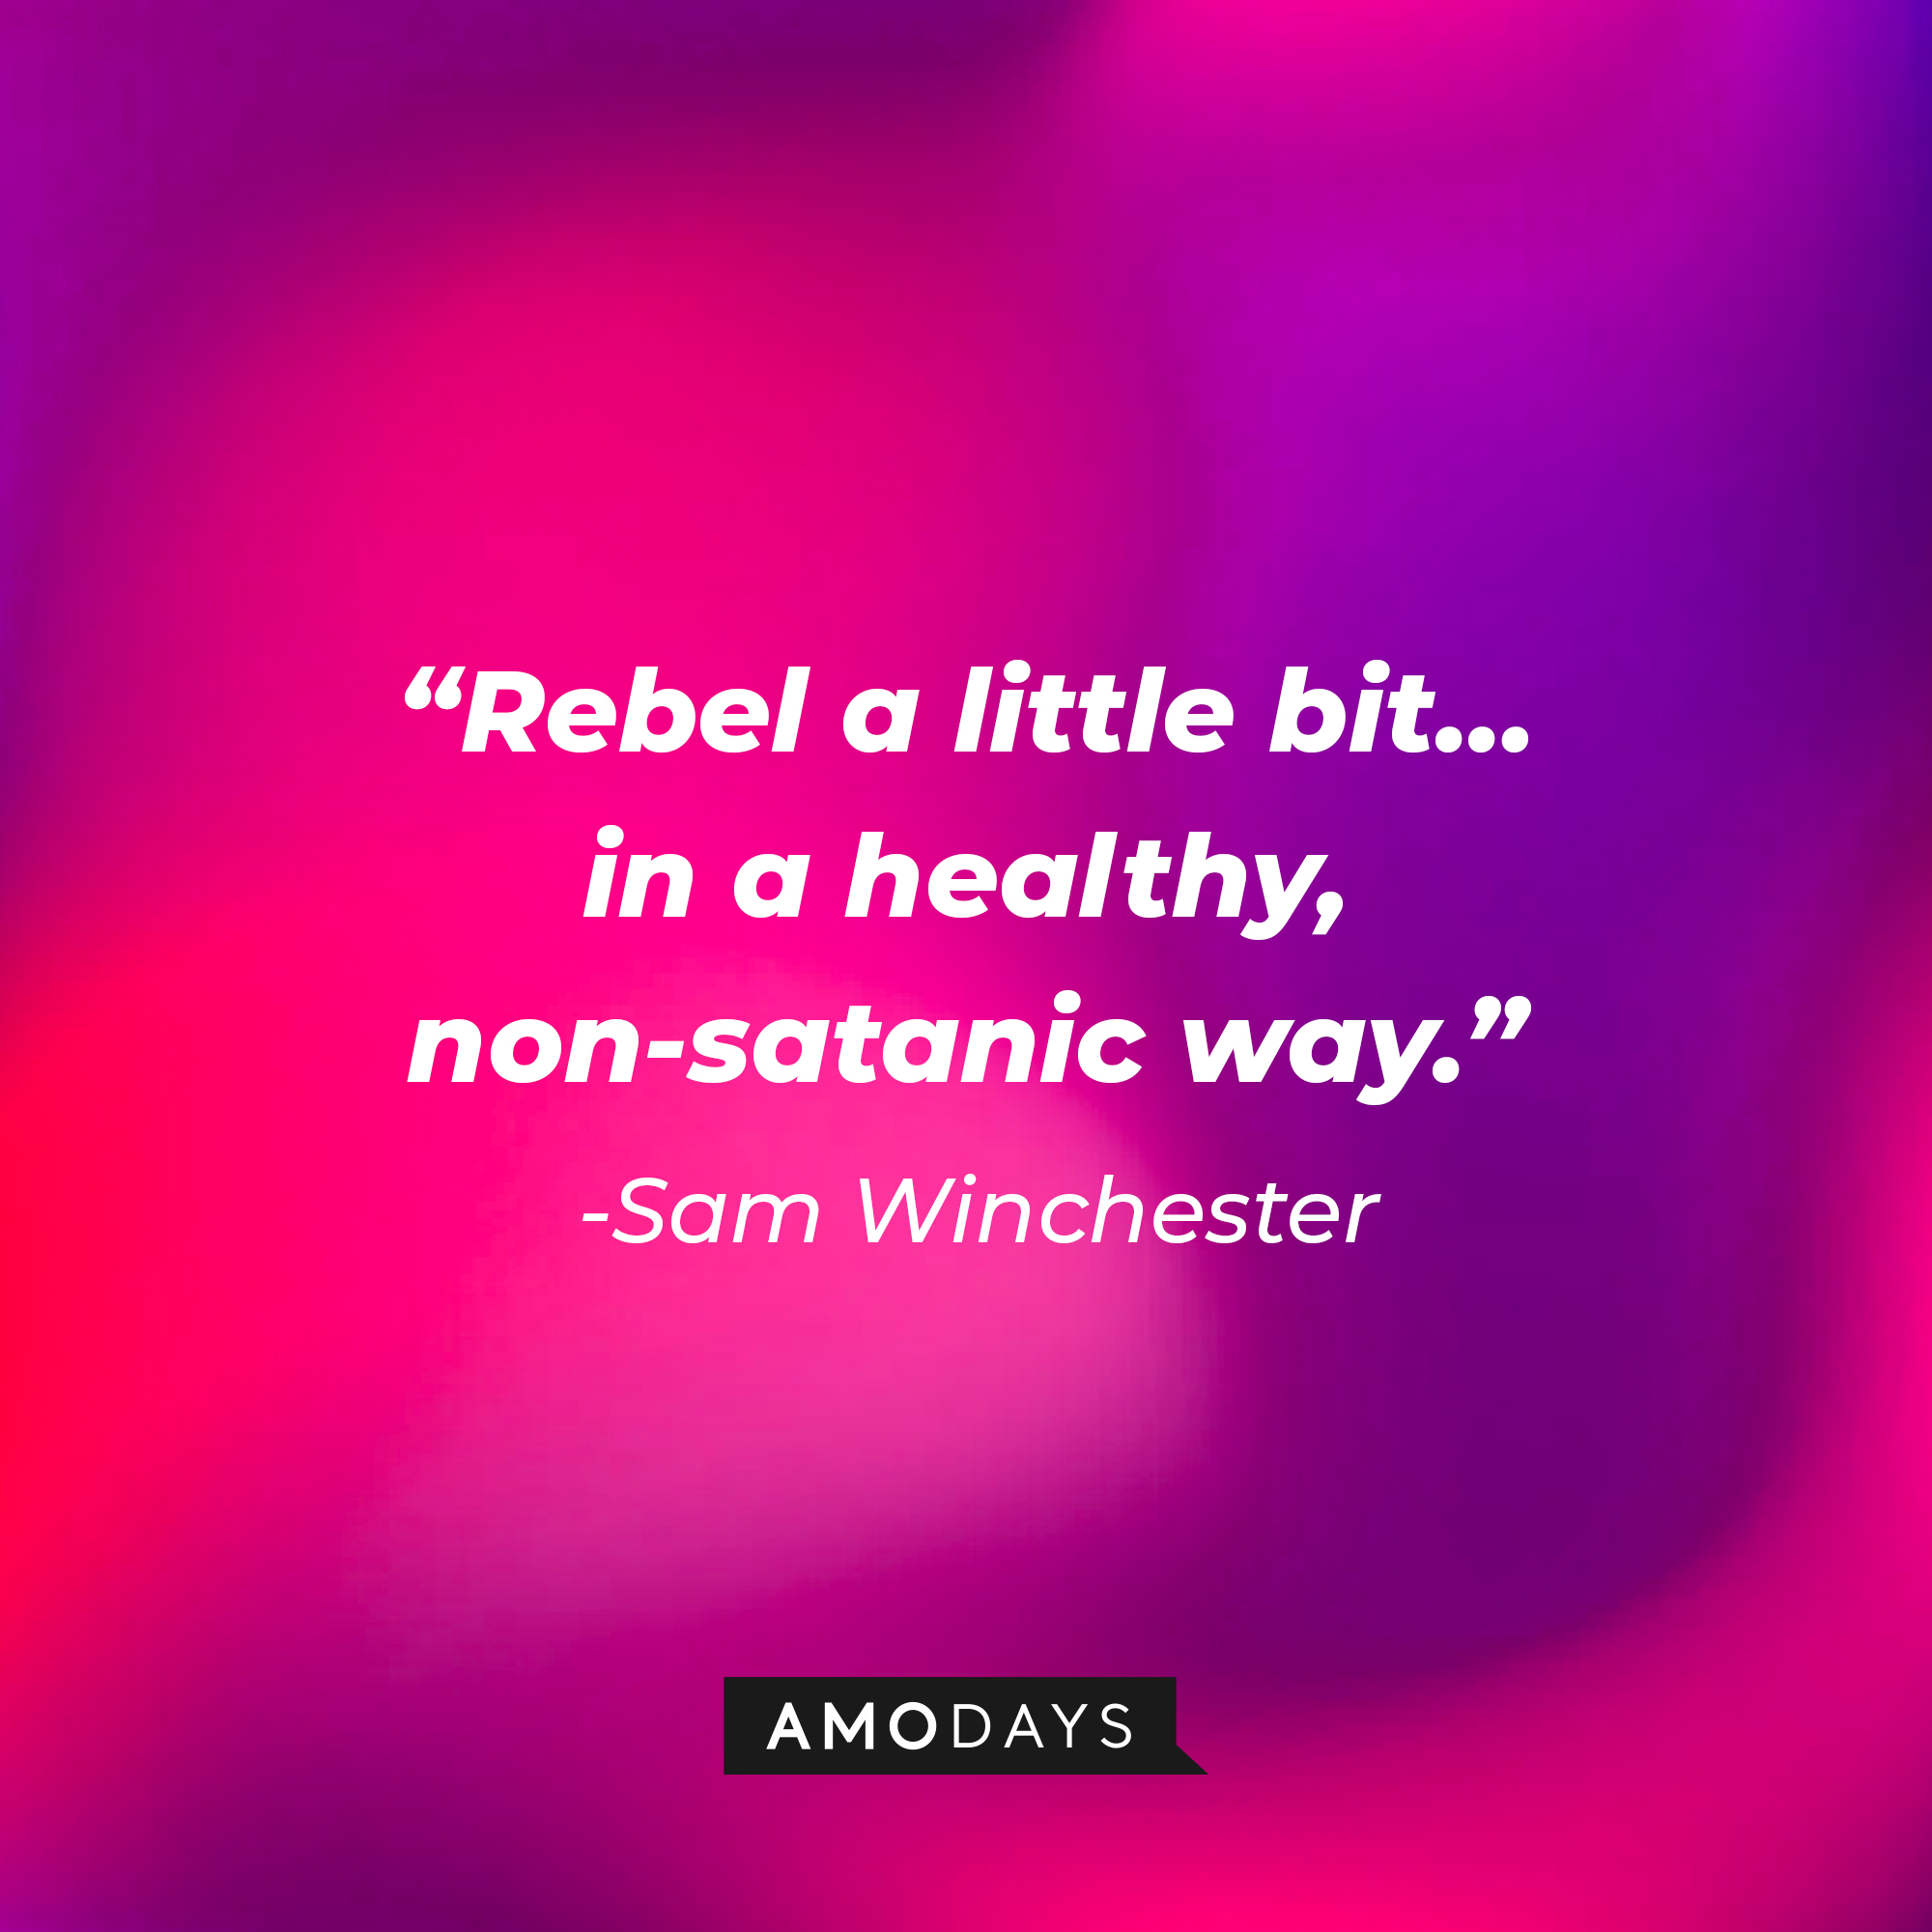 Sam Winchester’s quote: “Rebel a little bit… in a healthy, non-satanic way.” | Source: AmoDays